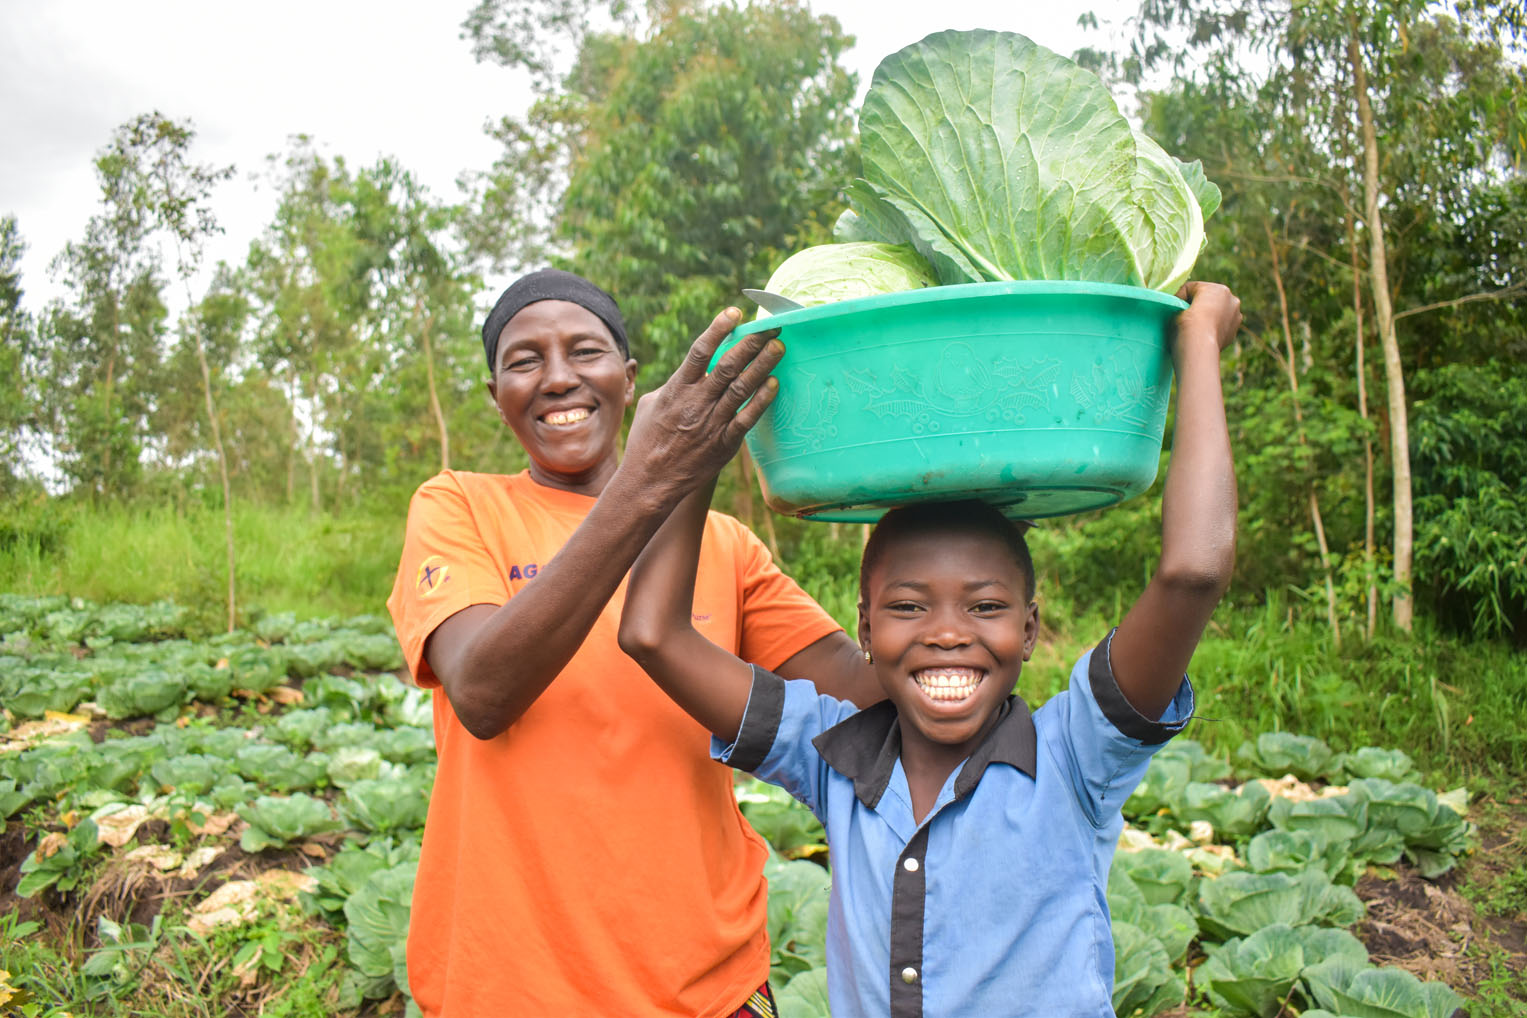 Parents worked with their children to harvest an abundant crop of cabbage and other vegetables after growing with a no-till method that retained moisture and protected the soil.